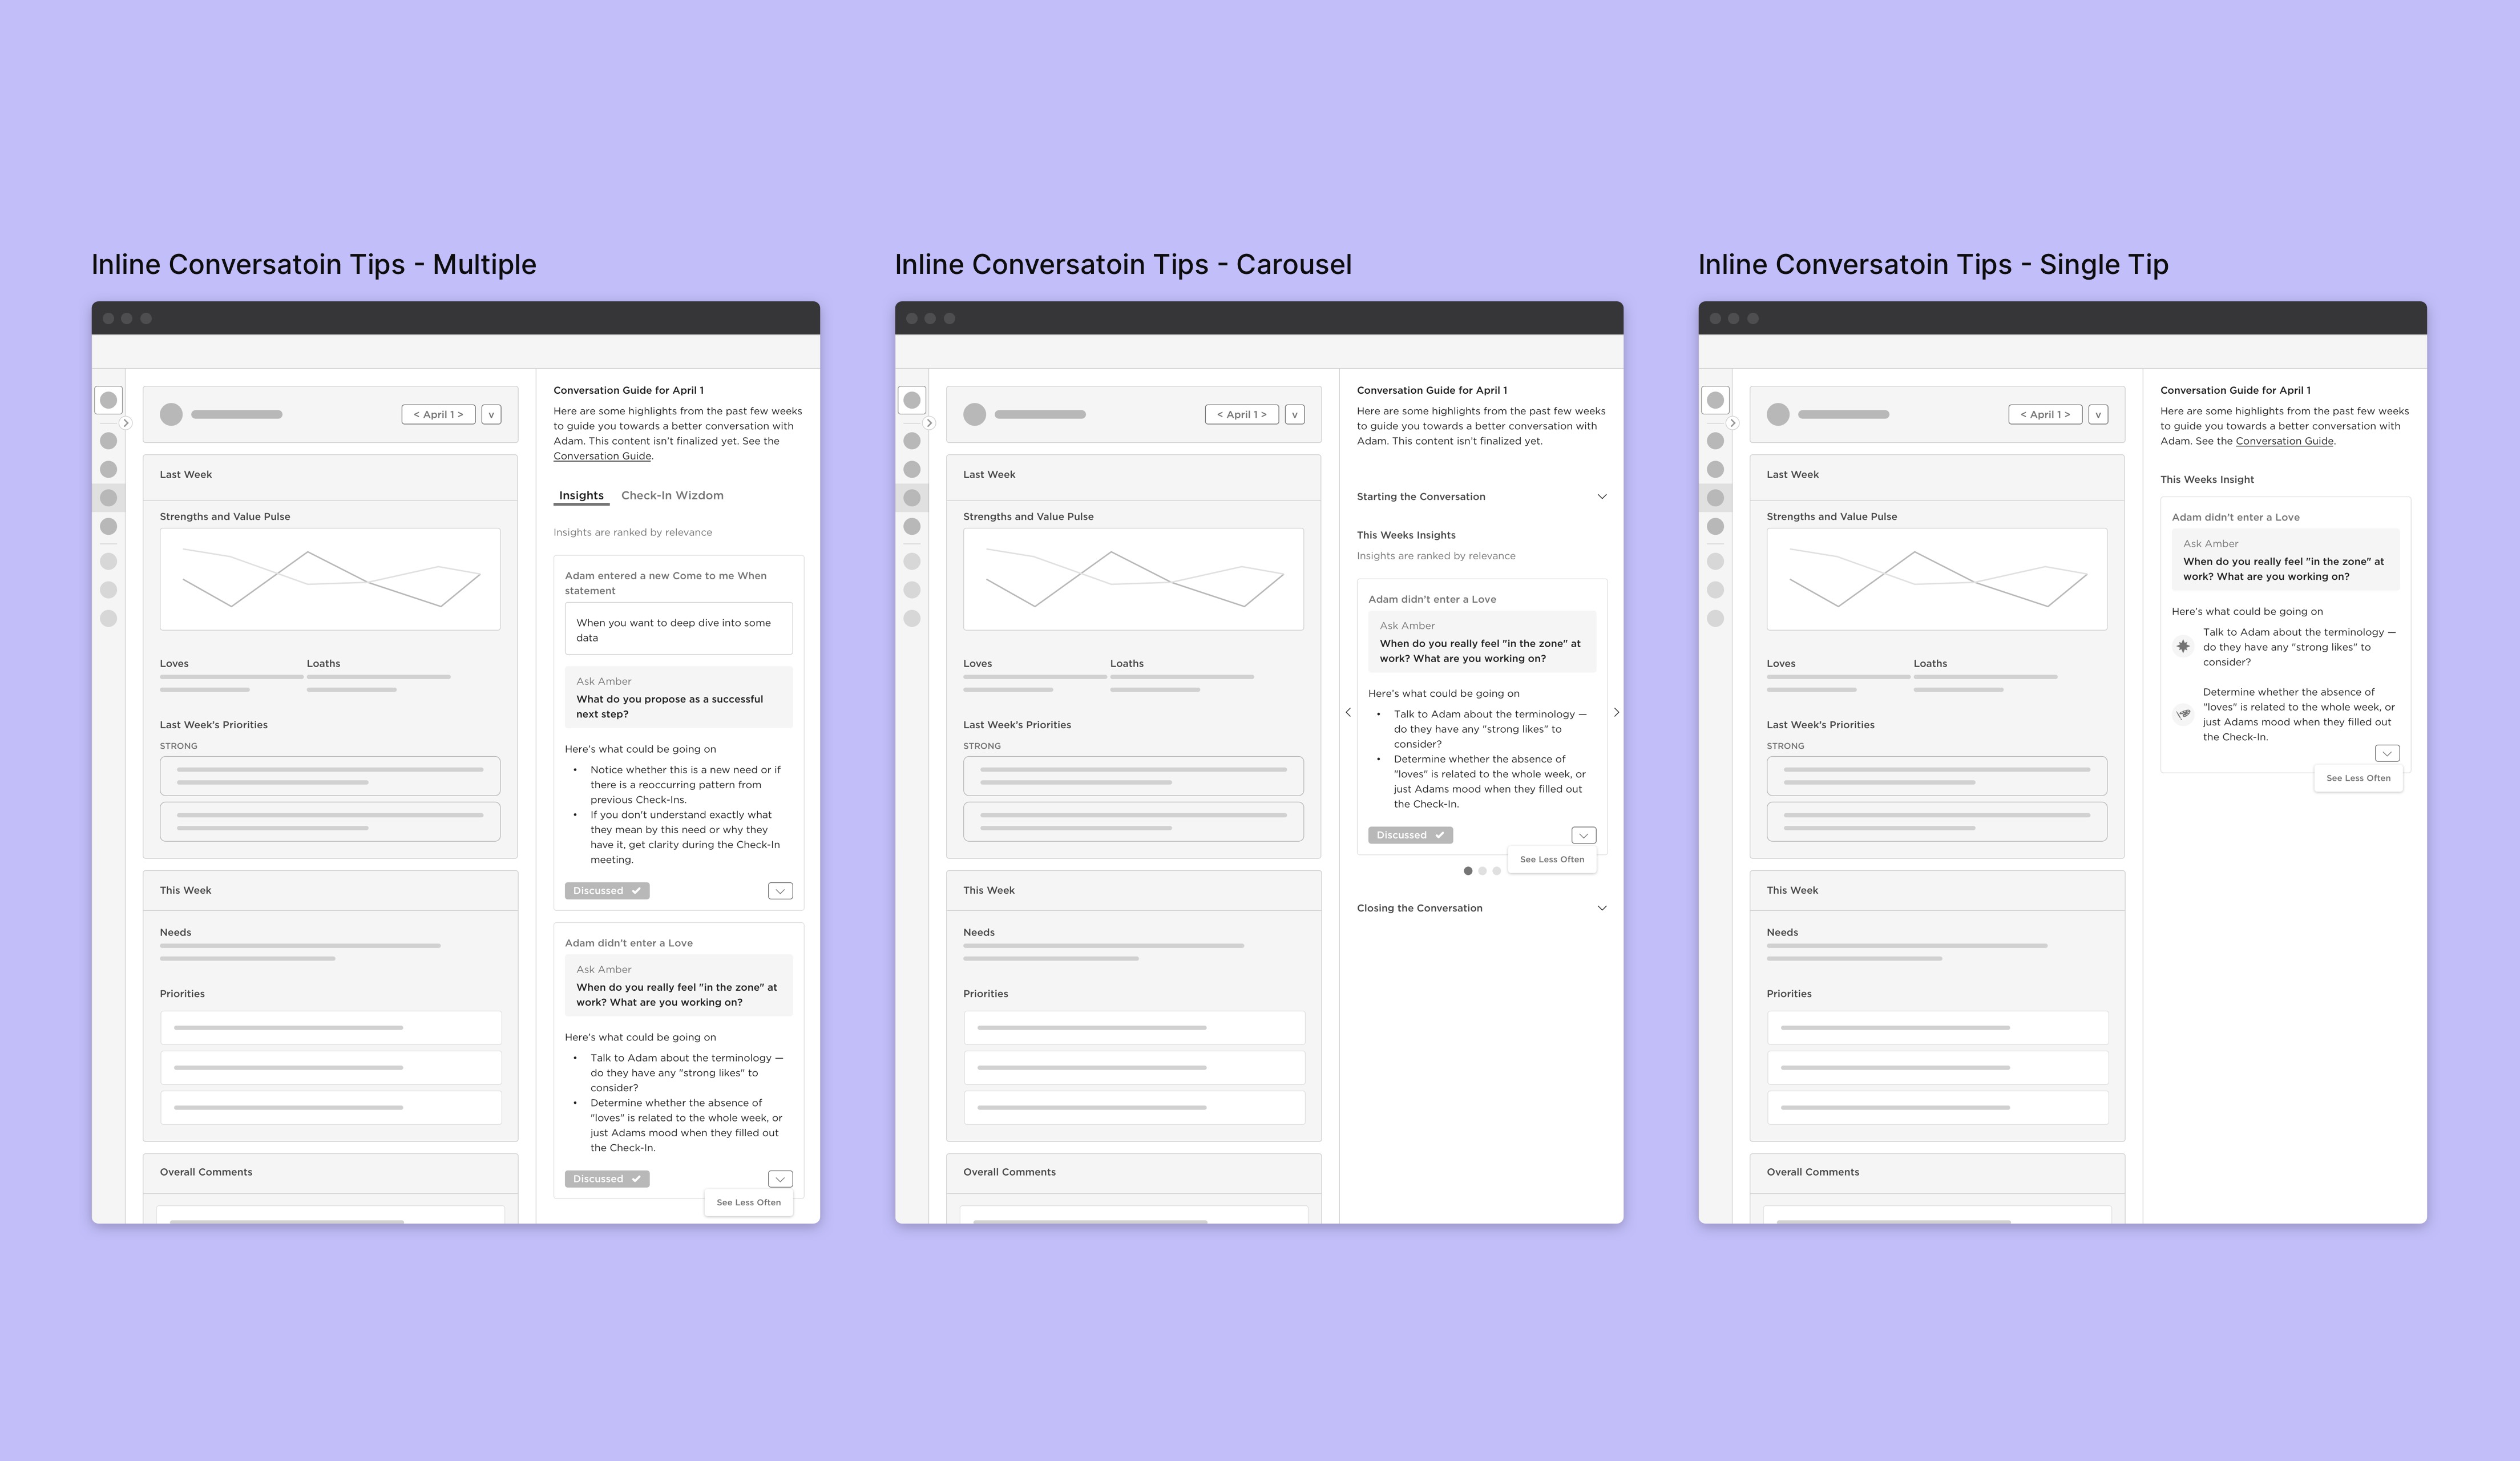 Updates to early wireframes based on initial research